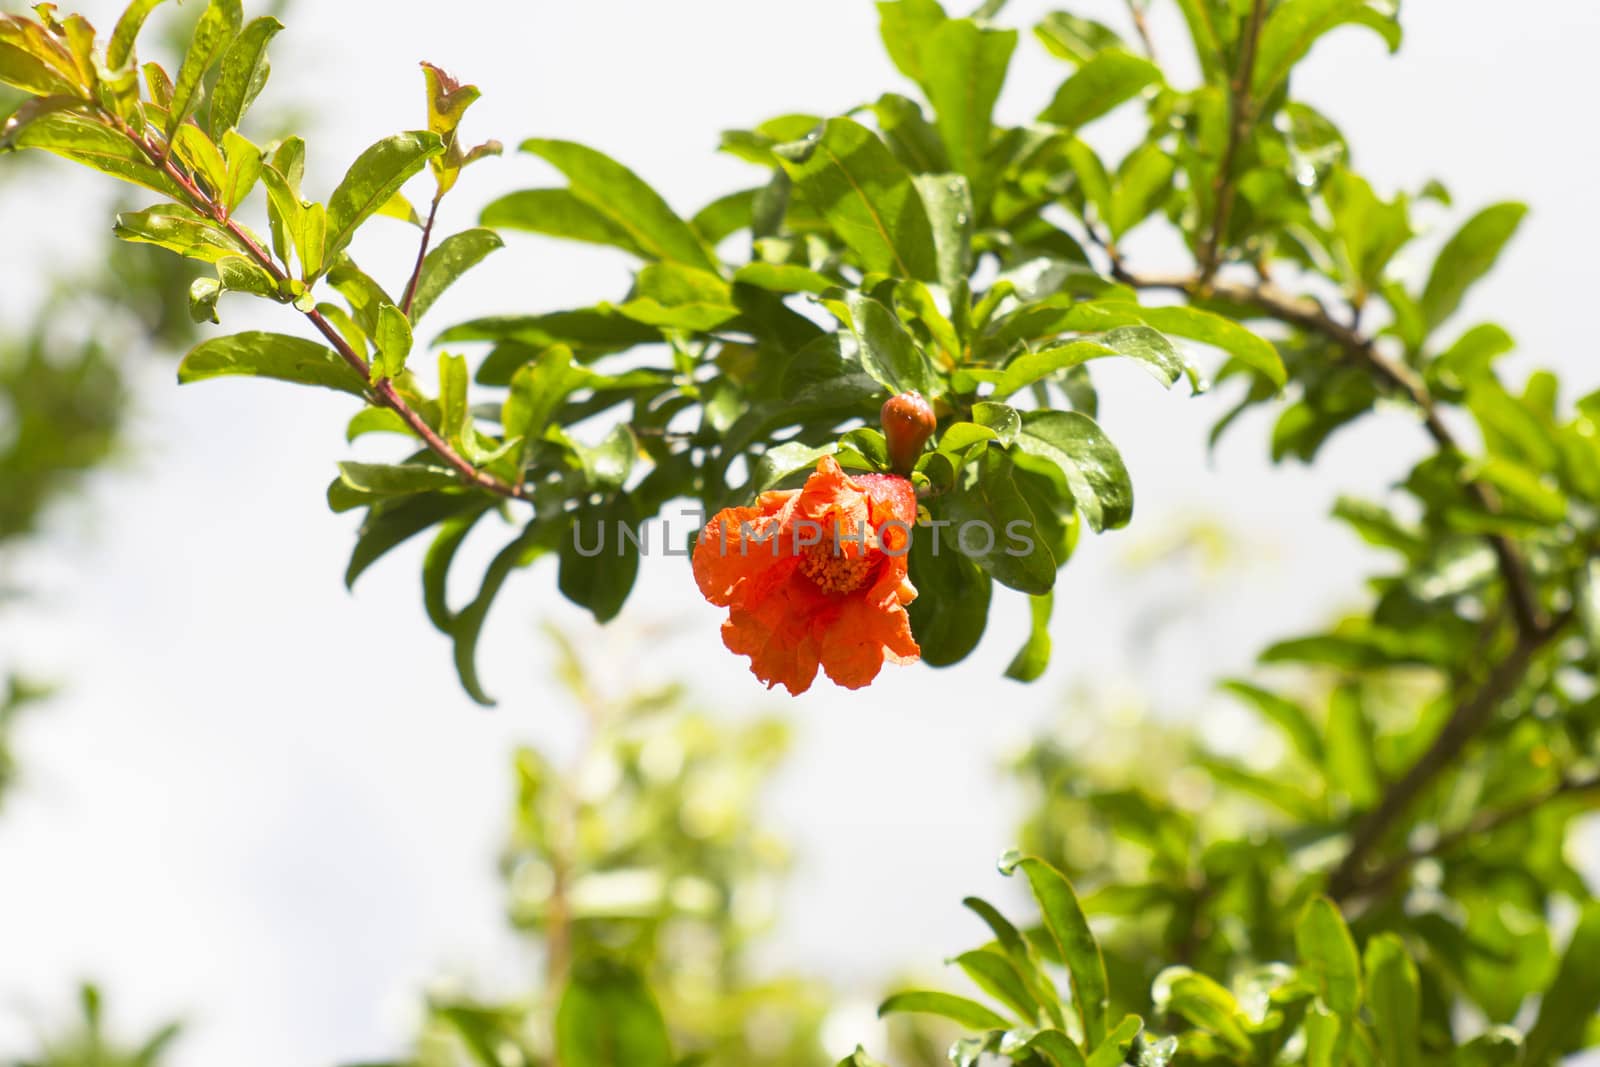 Pomegranate branch with flowers and ovaries on natural background